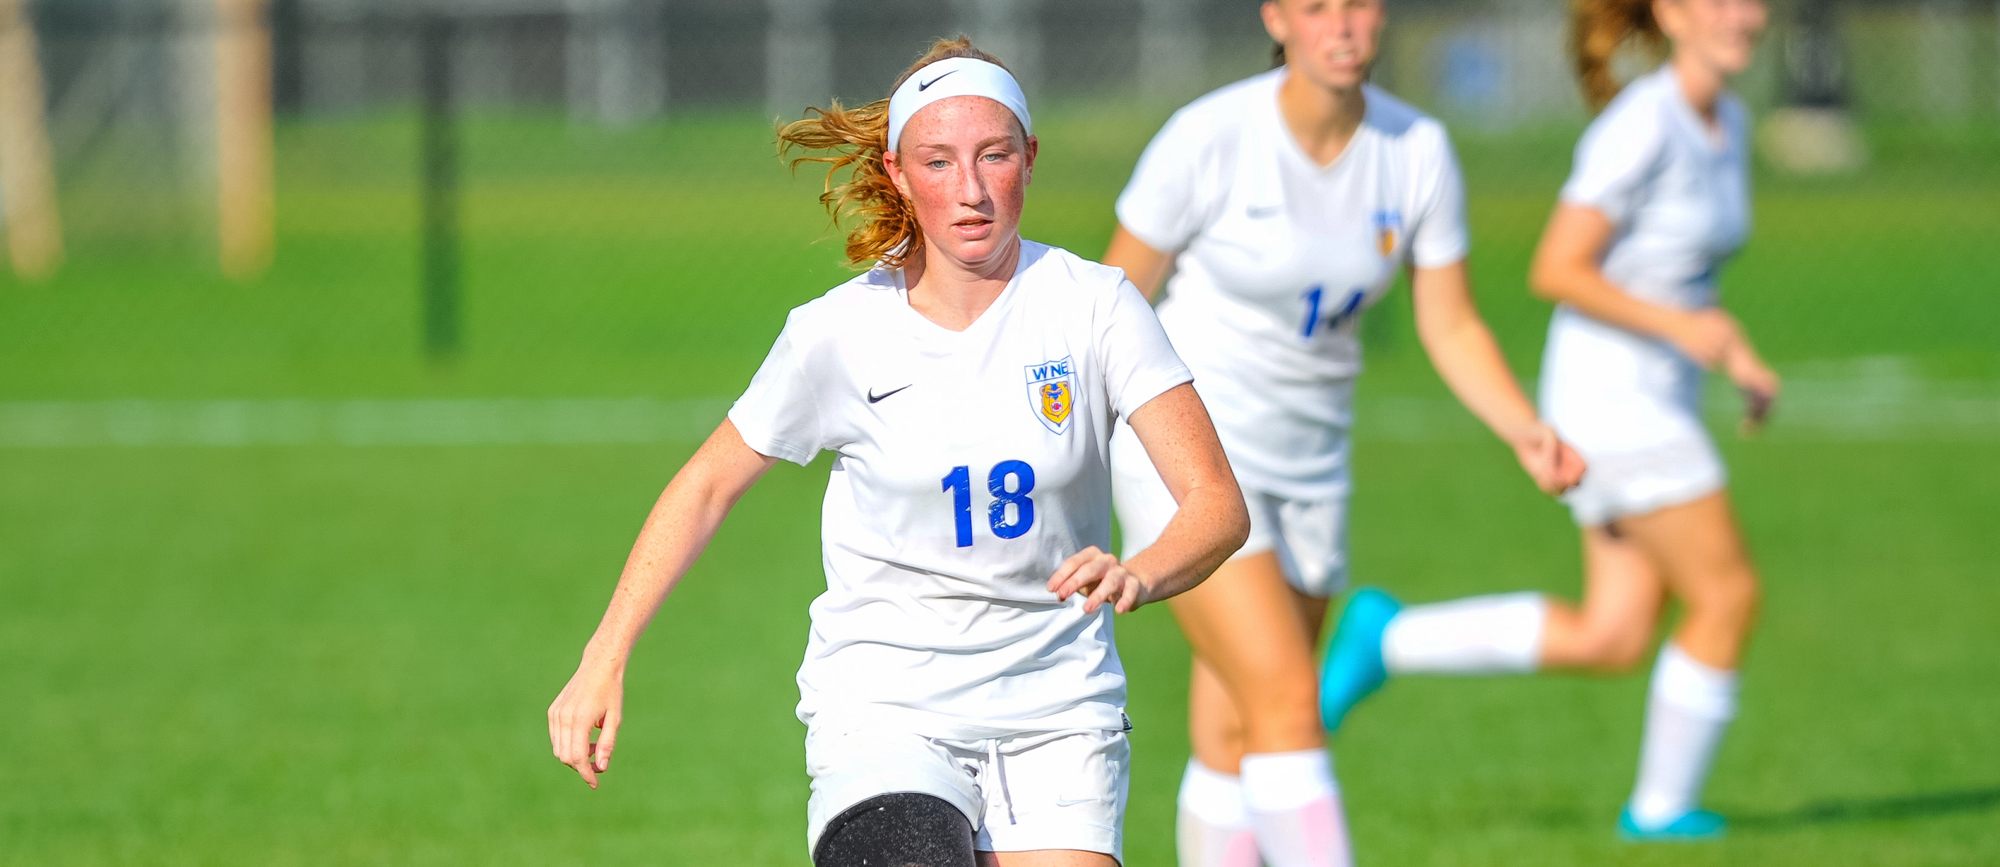 Big Second Half Sends Wentworth to 3-0 Win over Western New England